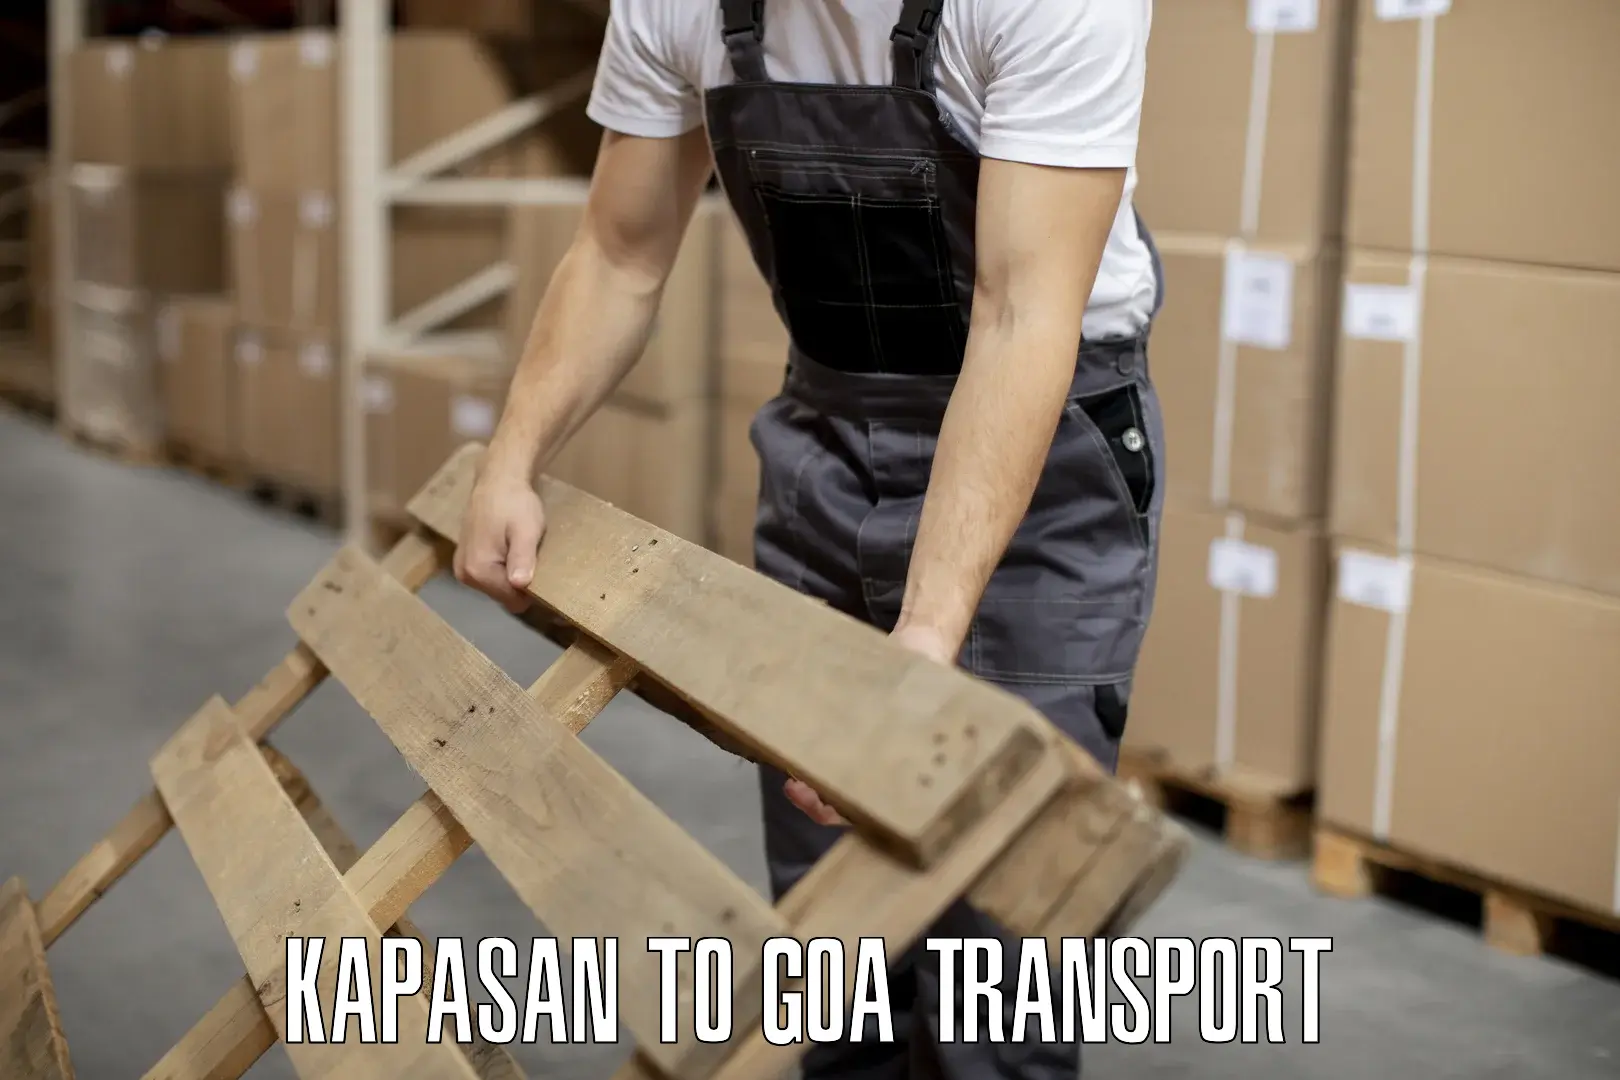 Transport bike from one state to another in Kapasan to South Goa